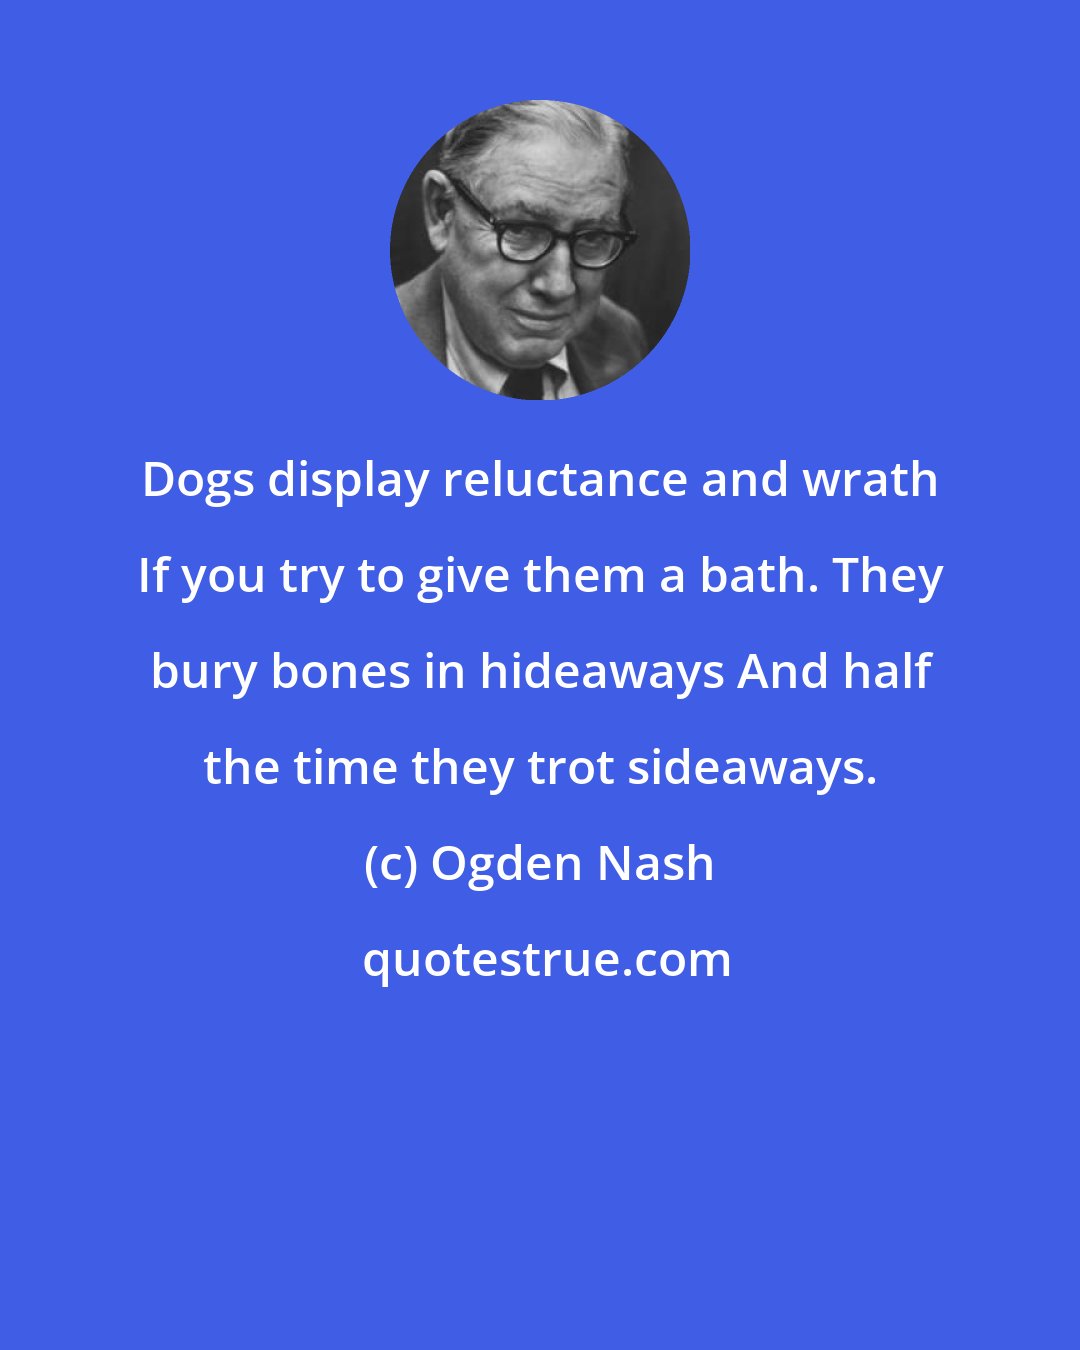 Ogden Nash: Dogs display reluctance and wrath If you try to give them a bath. They bury bones in hideaways And half the time they trot sideaways.